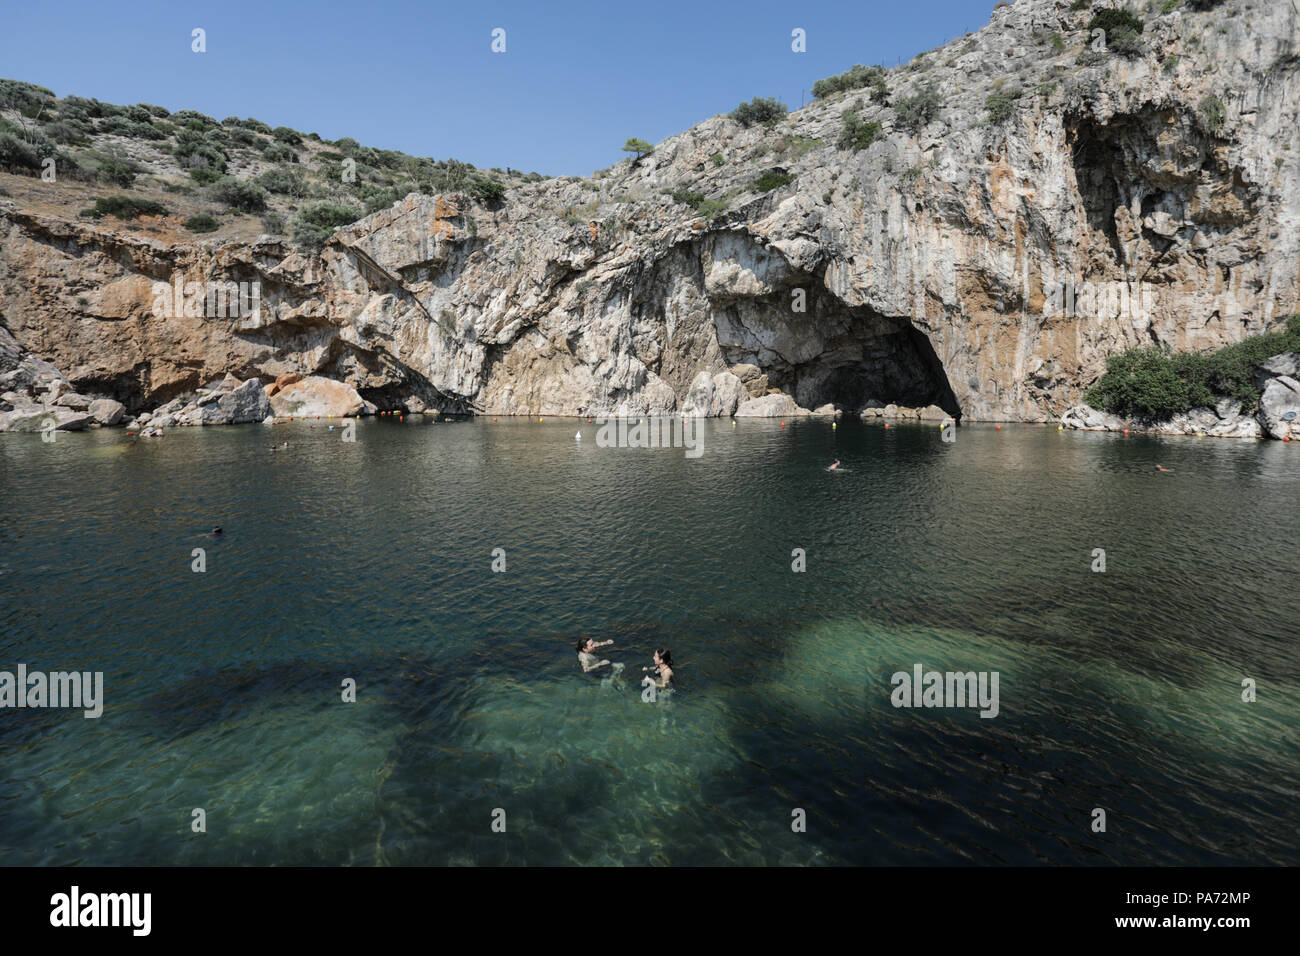 Athens. 19th July, 2018. Photo taken on July 19, 2018 shows people swimming in Vouliagmeni Lake in south region of Athens, Greece. Situated on an idyllic landscape, the rare geological phenomenon of the Vouliagmeni Lake attracts many visitors. Credit: Xinhua /Lefteris Partsalis/Xinhua/Alamy Live News Stock Photo